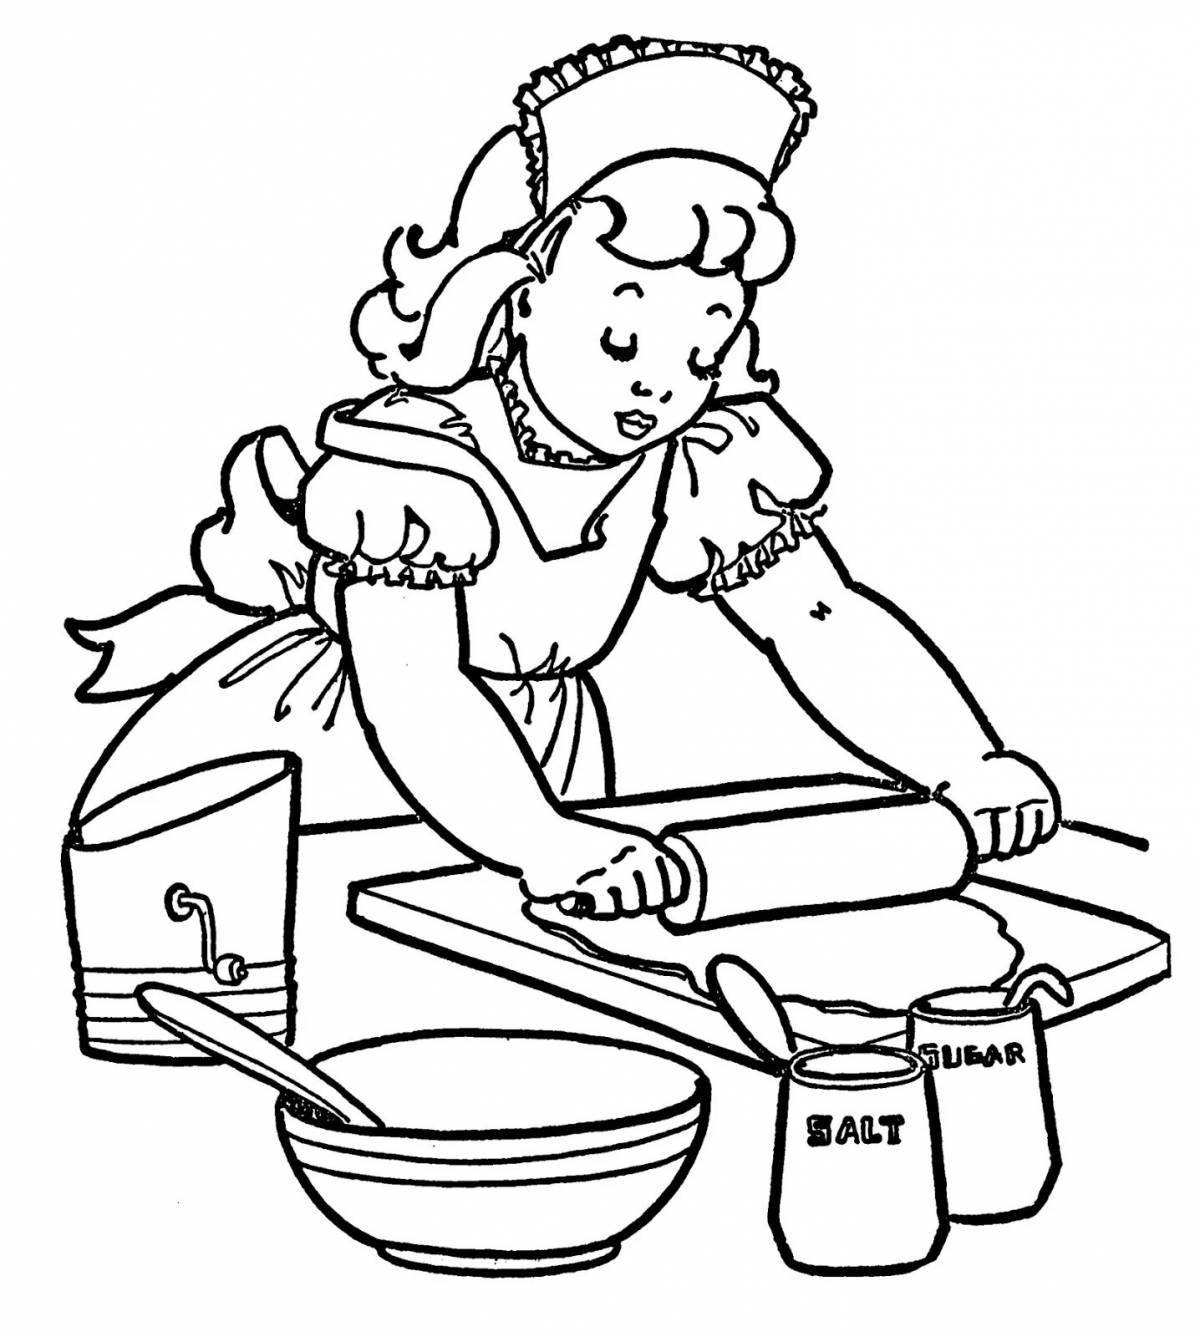 Coloring page energetic housewife